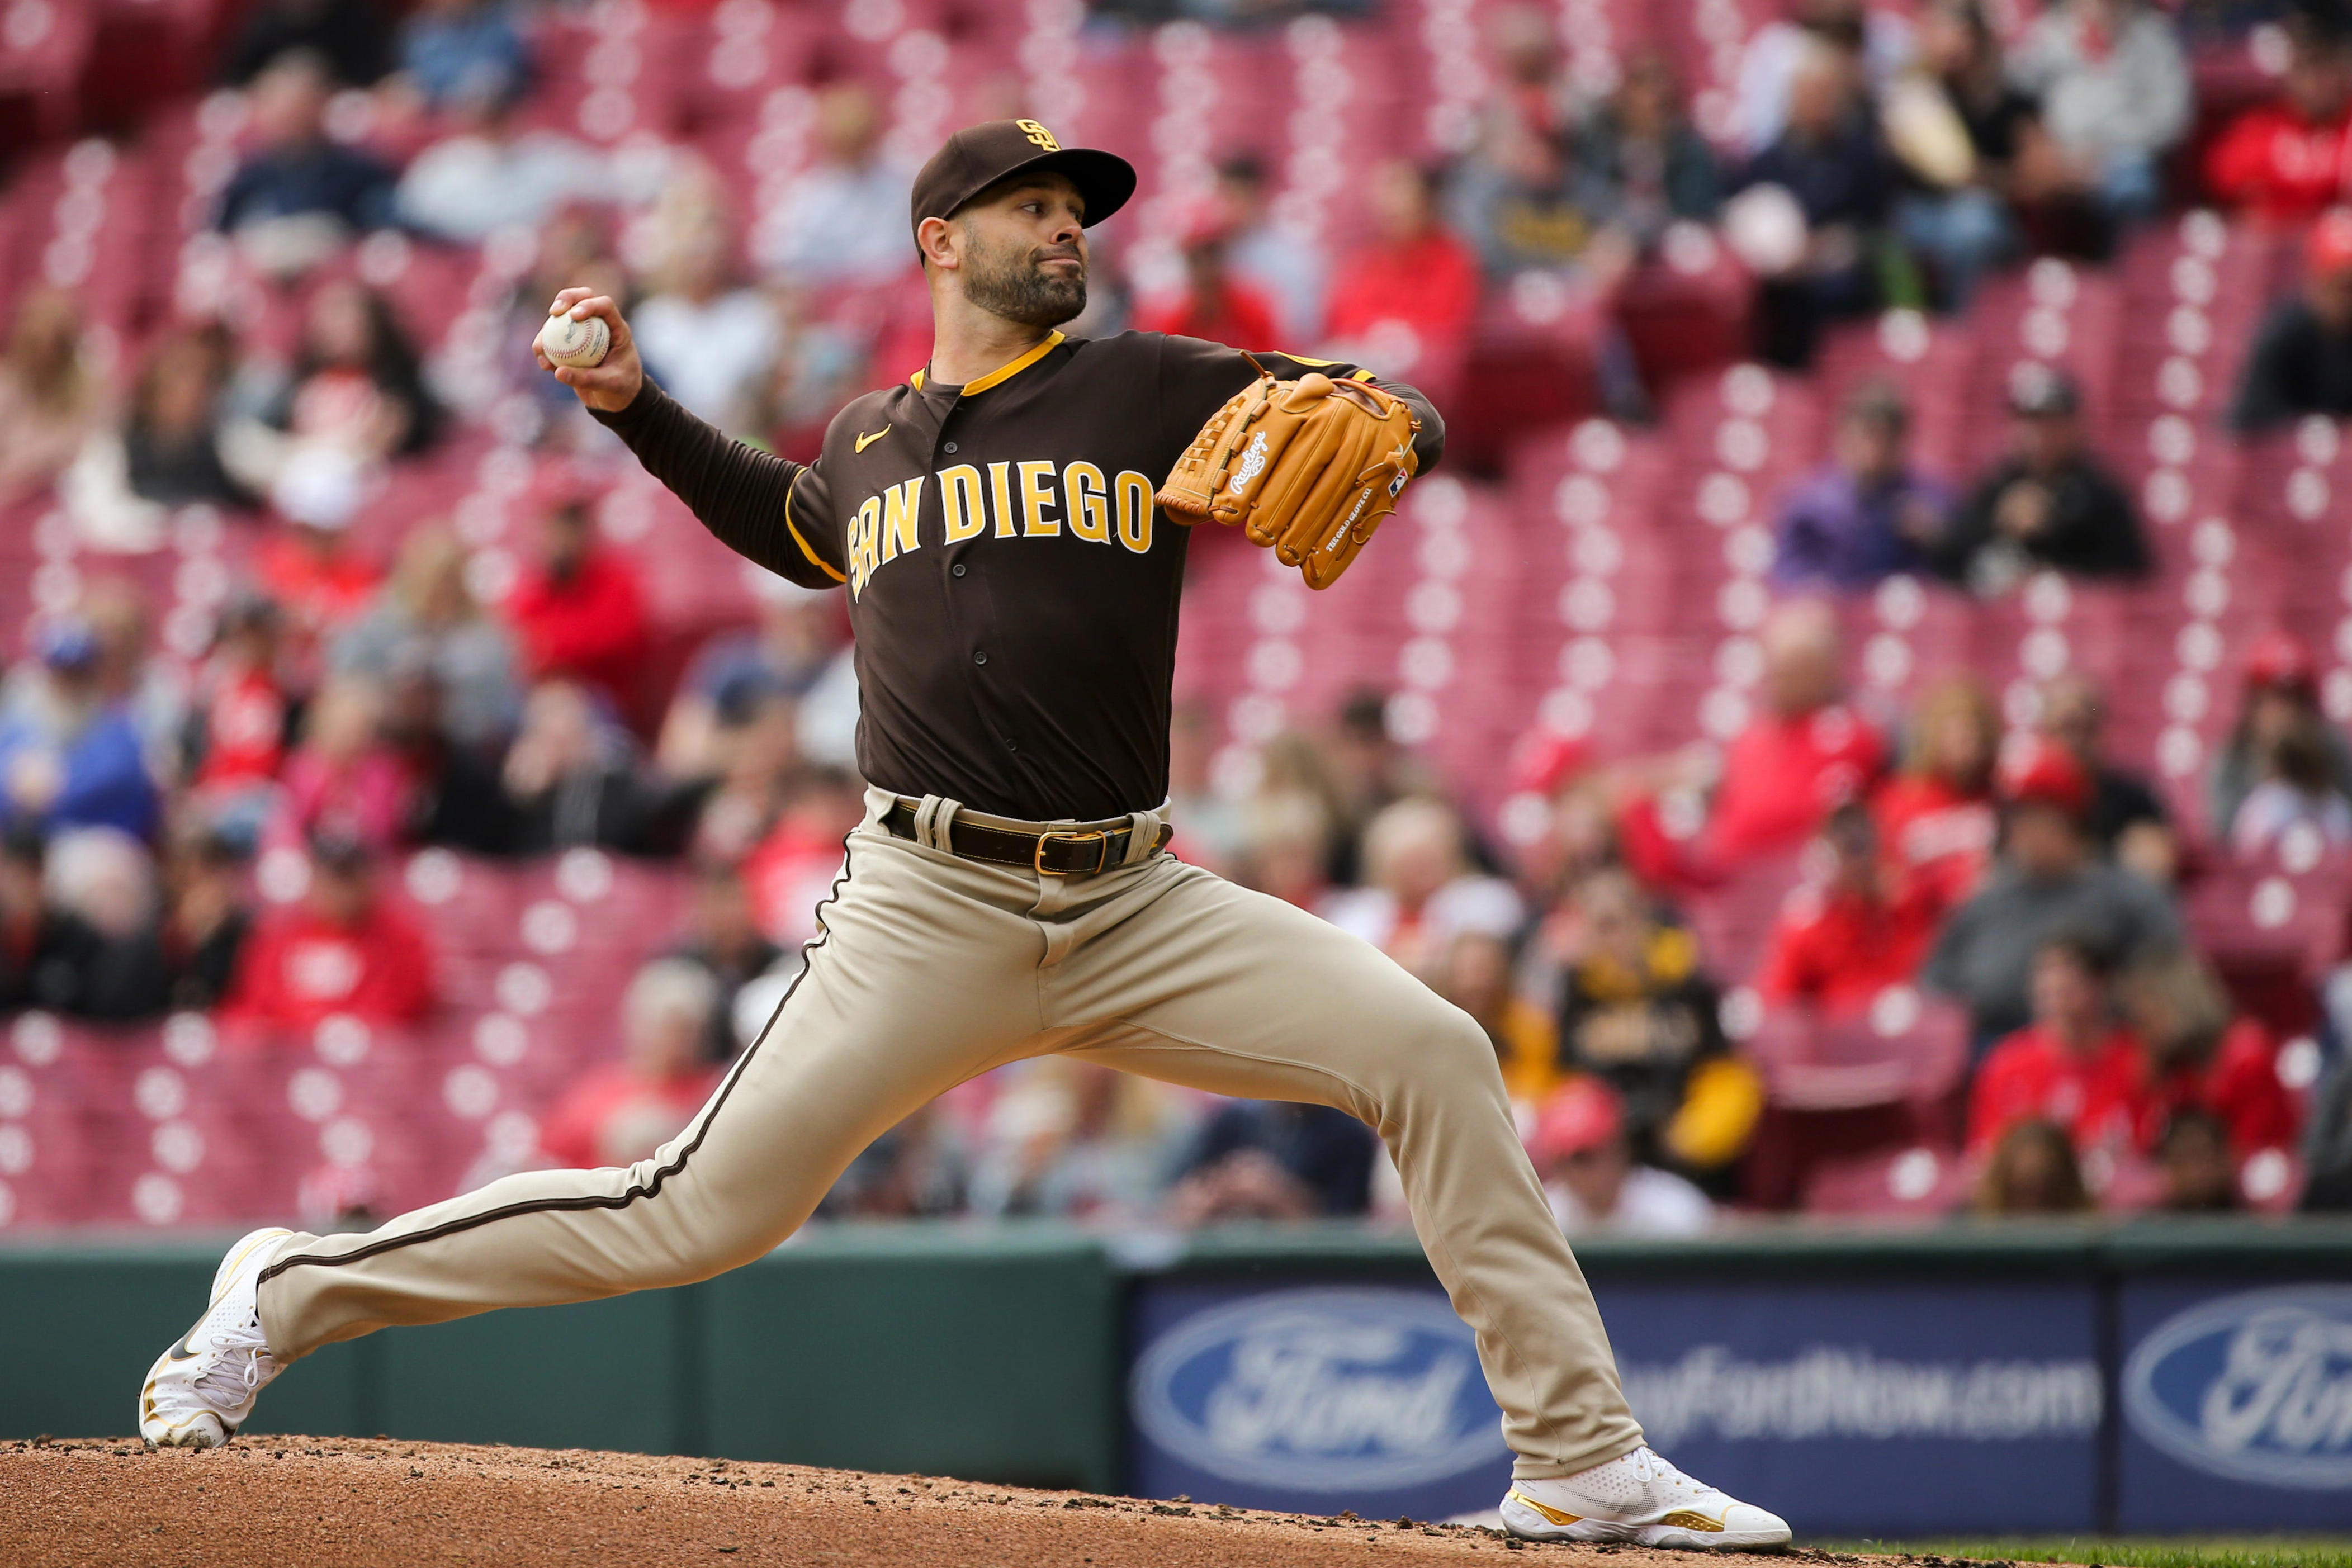 Nick Martinez, who led San Diego in games pitched, to sign with